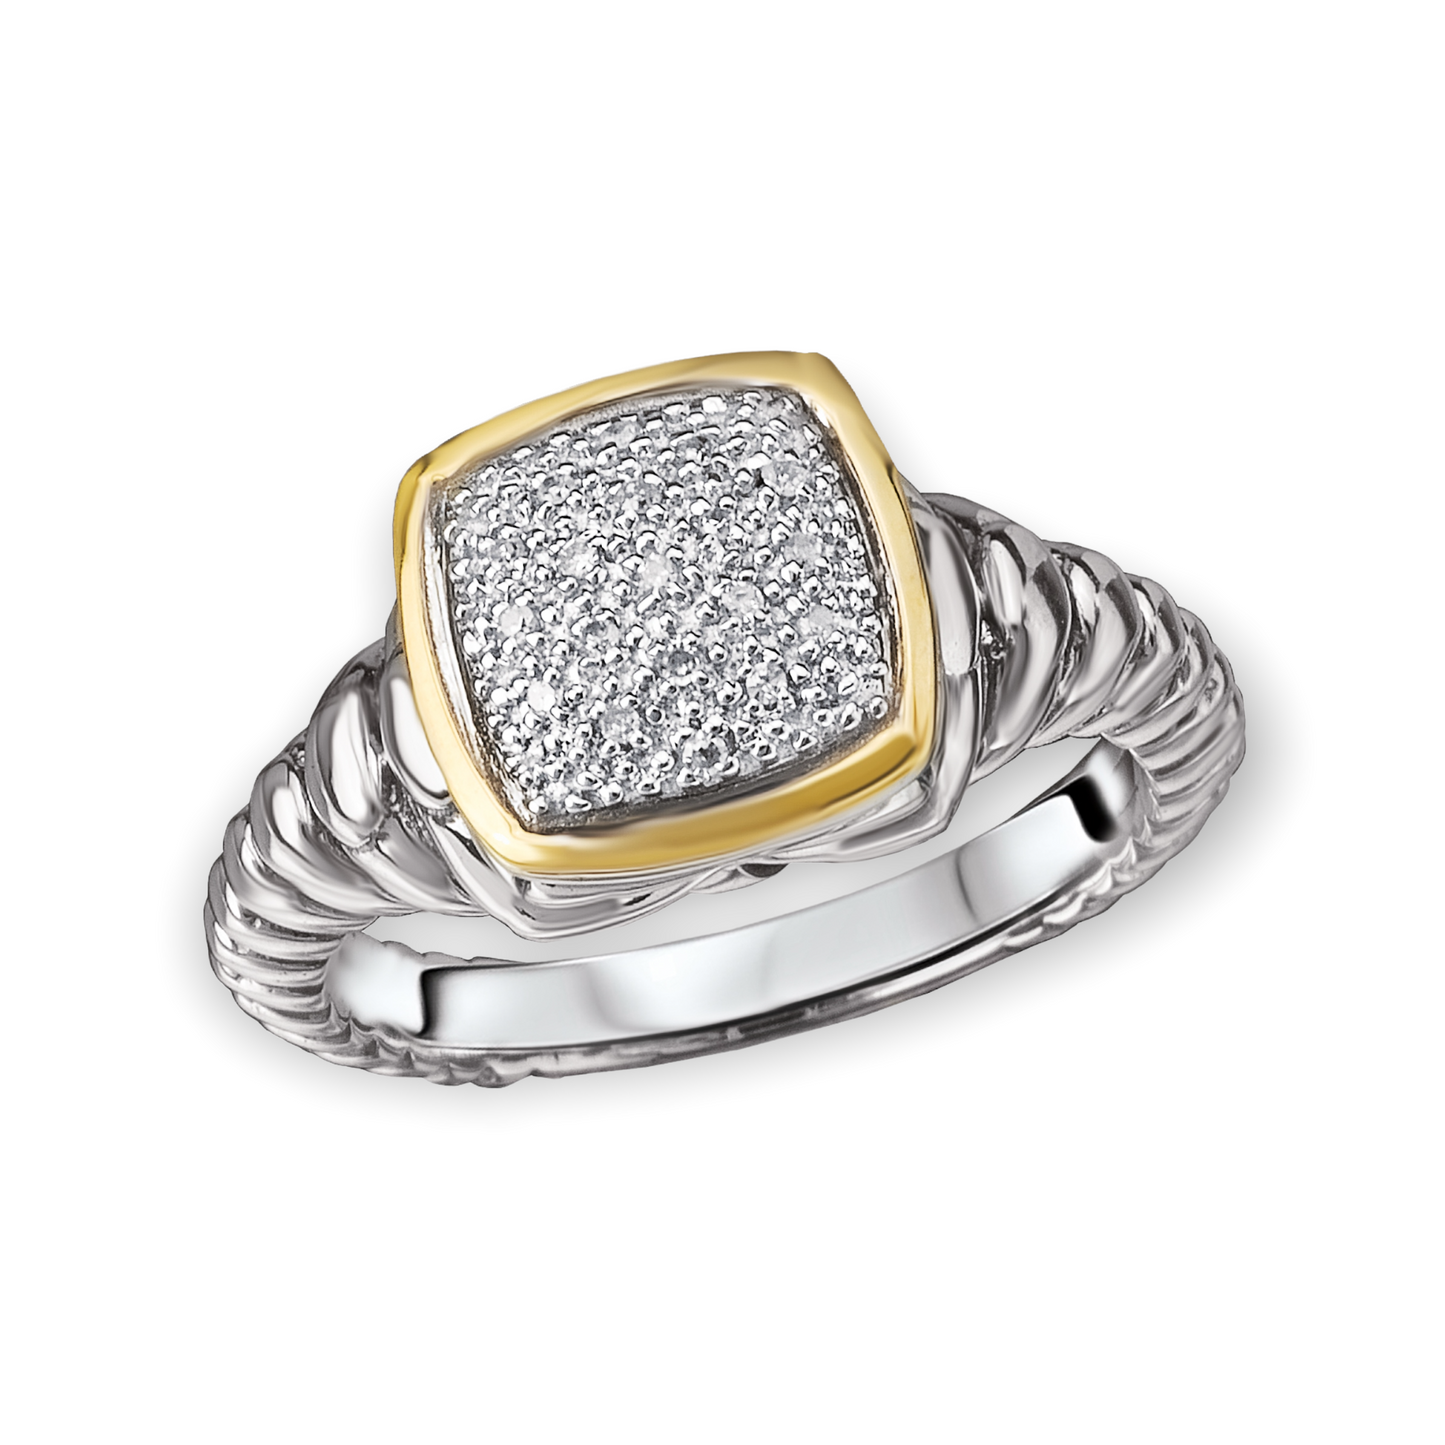 Fashion Ring with Pave' Diamonds